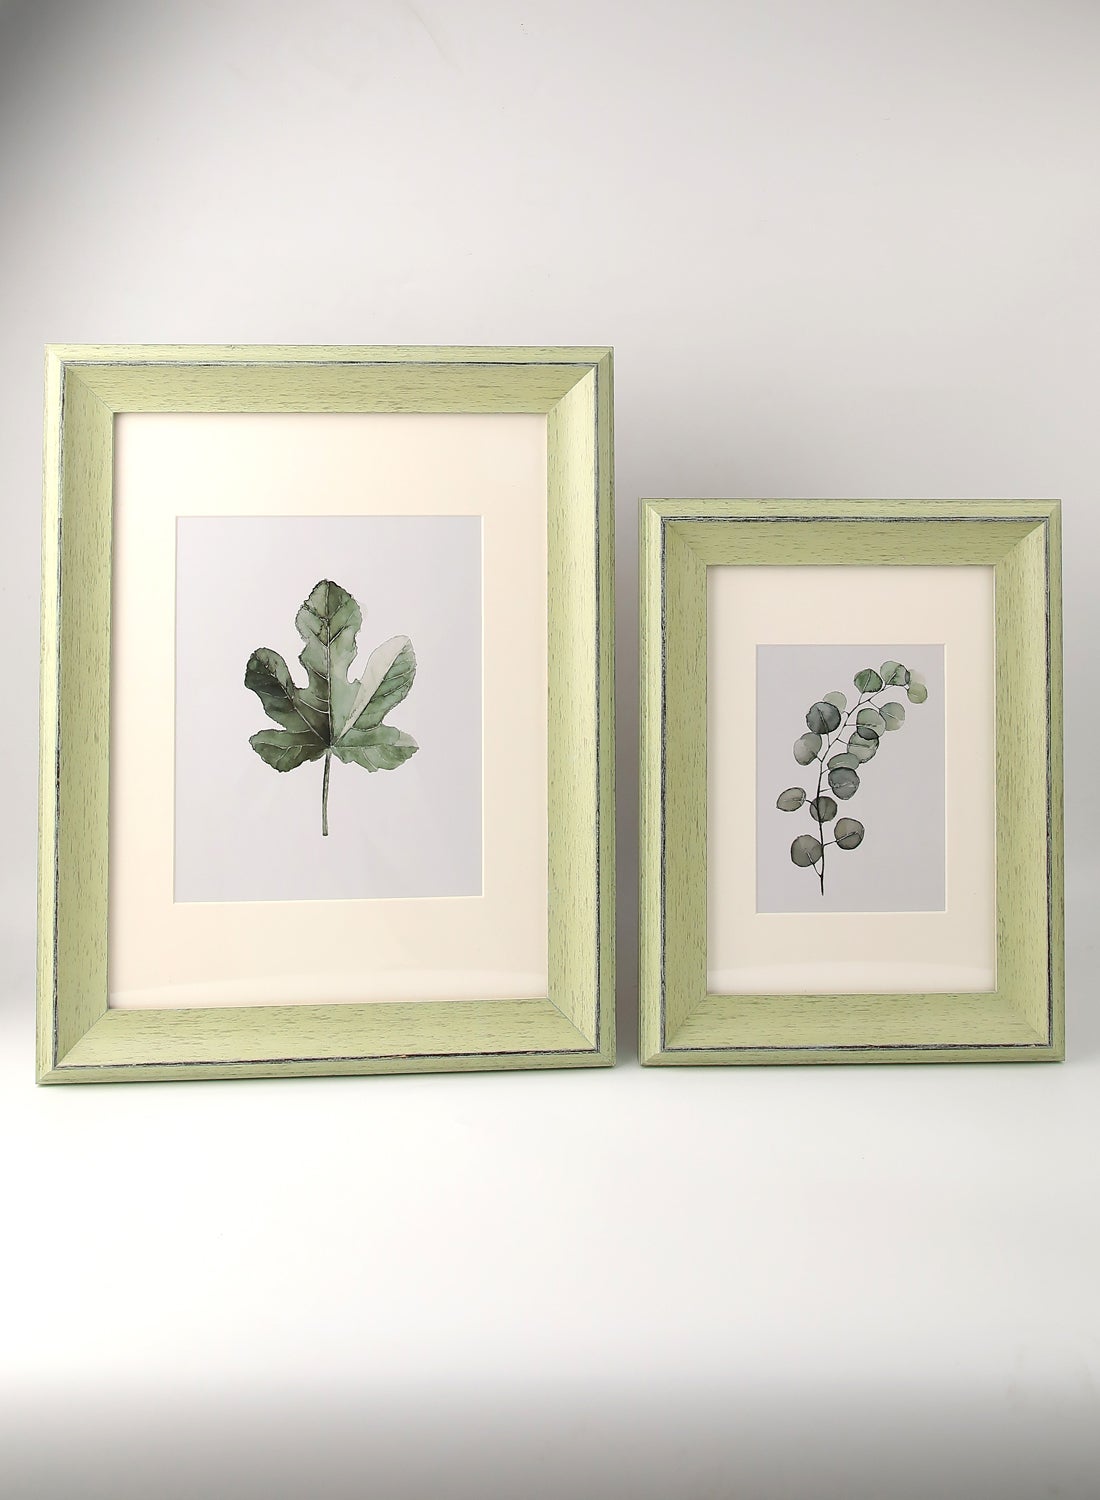 Wall Frames With Outer Frame Green Outer frame size--L37xH47 cm Photo size--8x10 inch 